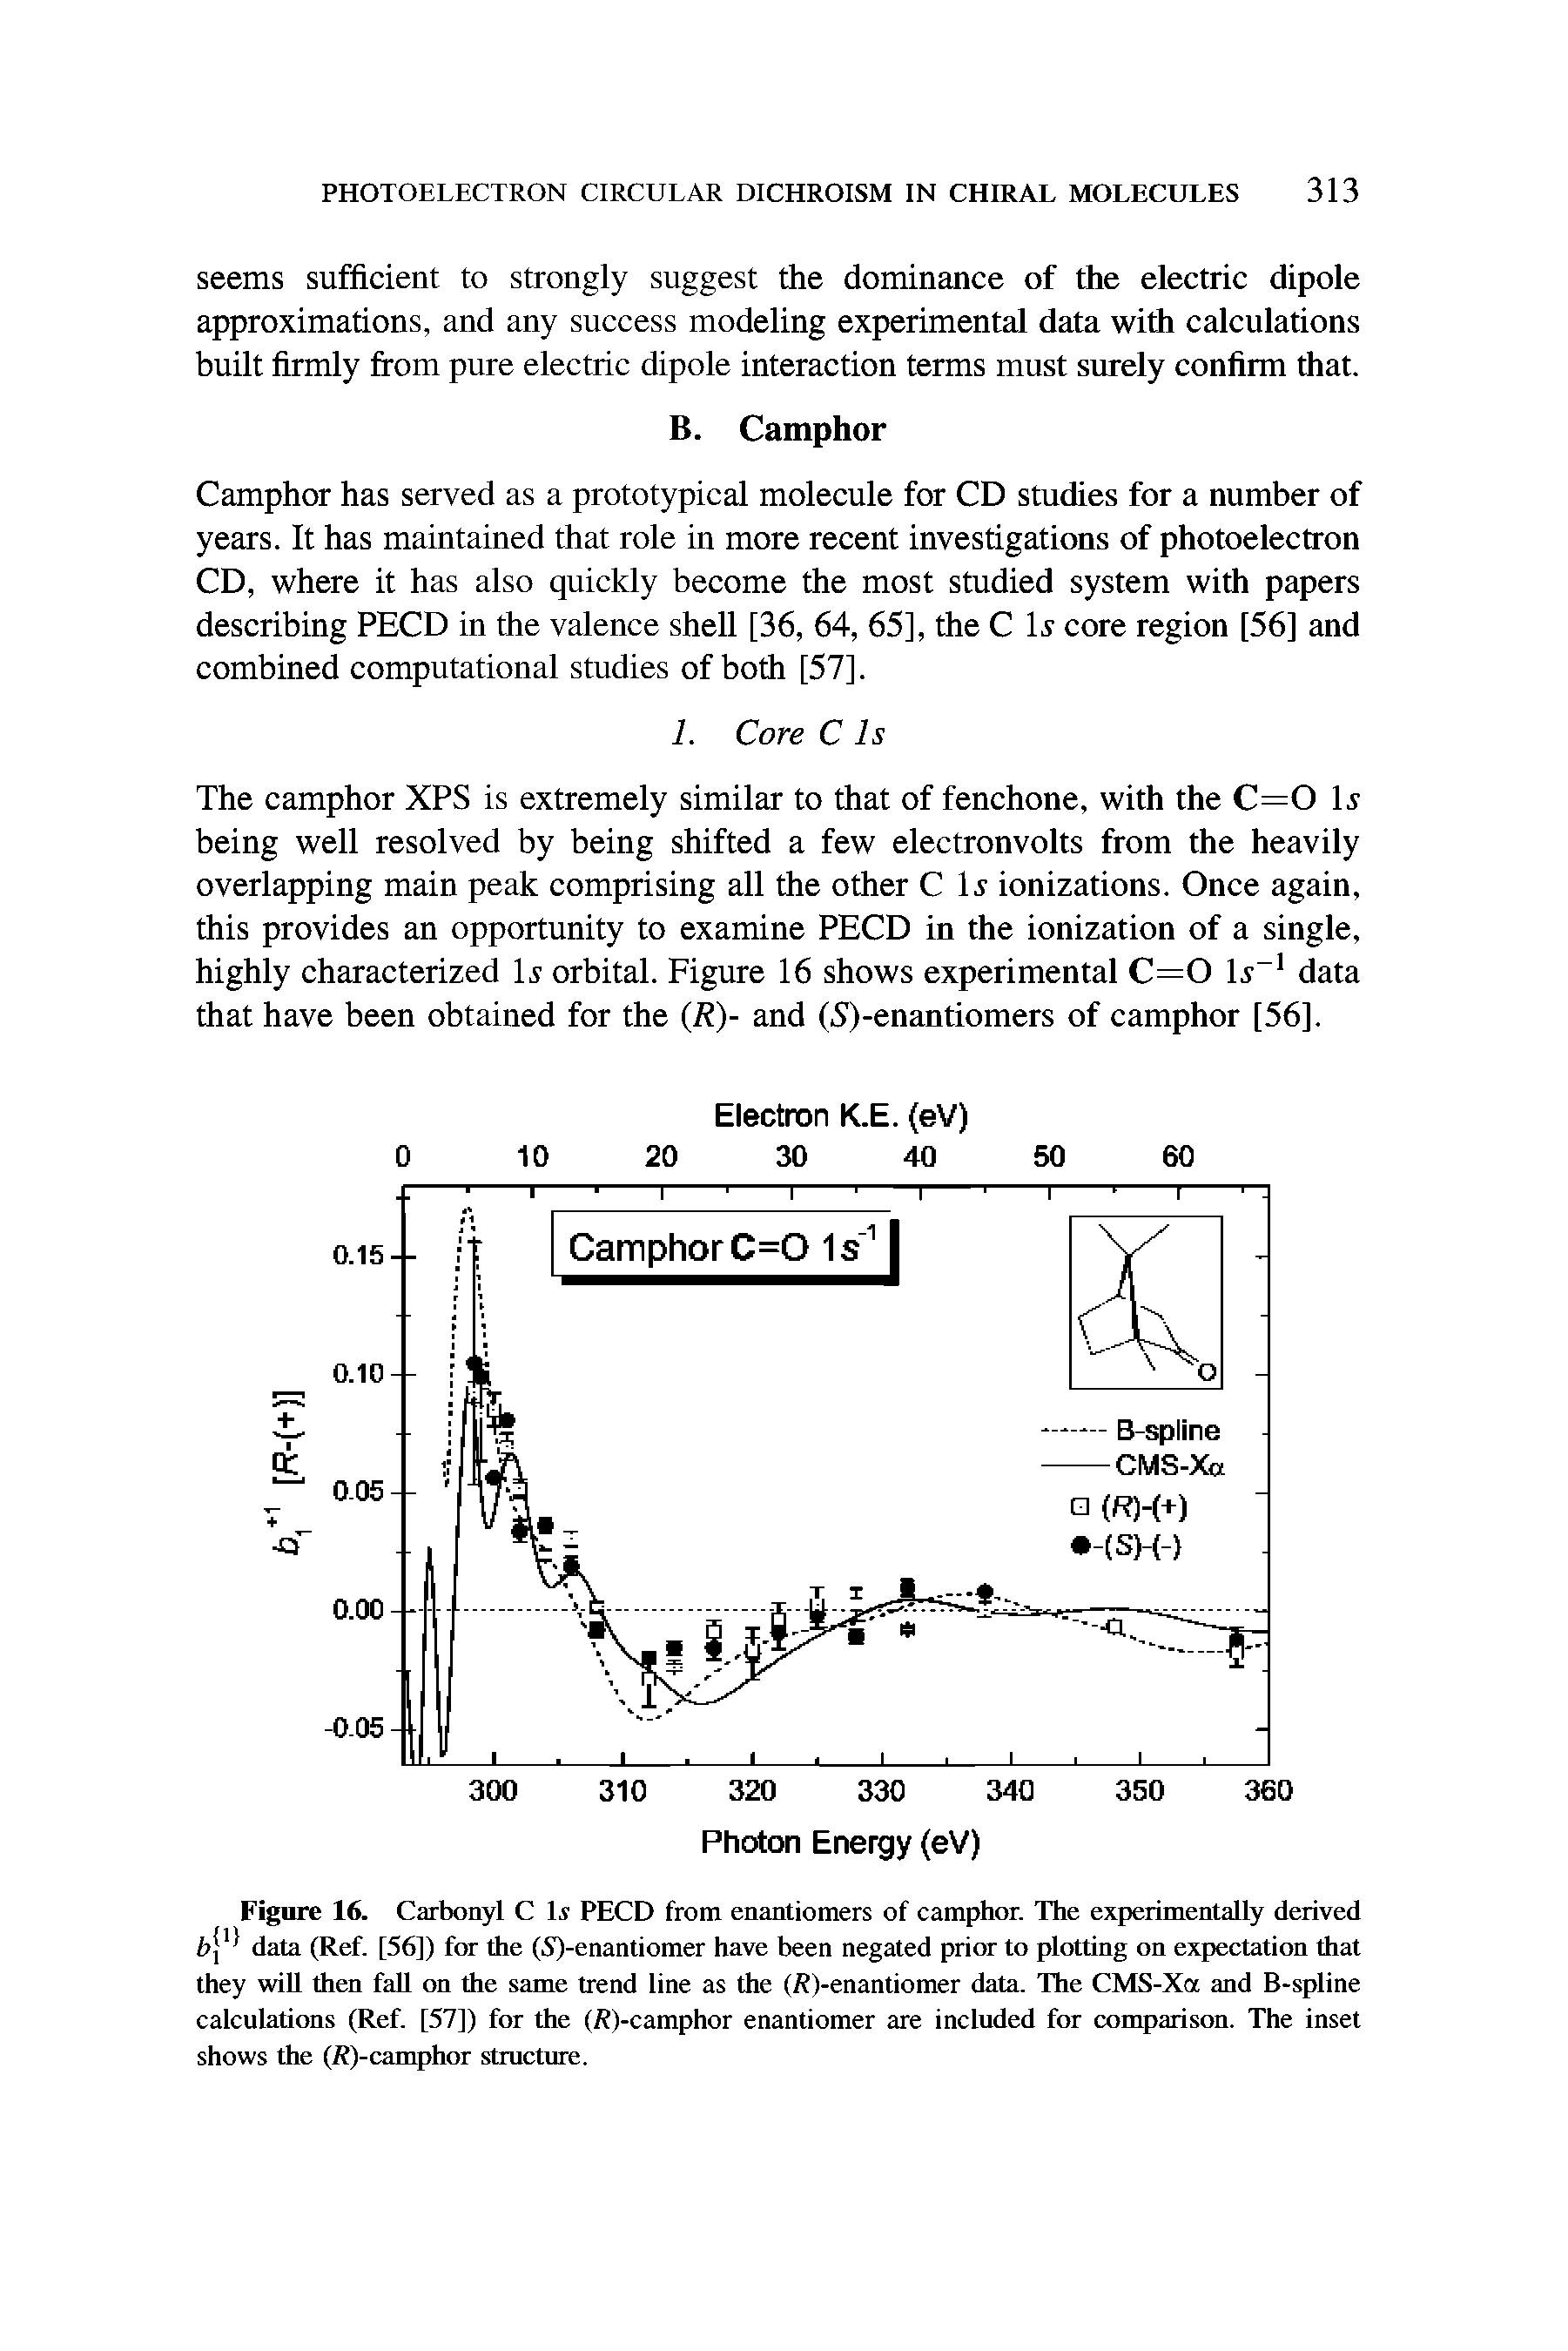 Figure 16. Carbonyl C PECD from enantiomers of camphor. The experimentally derived data (Ref. [56]) for the (iS)-enantiomer have been negated prior to plotting on expectation that they will then fall on the same trend line as the (/ )-enantiomer data. The CMS-Xa and B-spline calculations (Ref. [57]) for the (R)-camphor enantiomer are included for comparison. The inset shows the (R)-camphor structure.